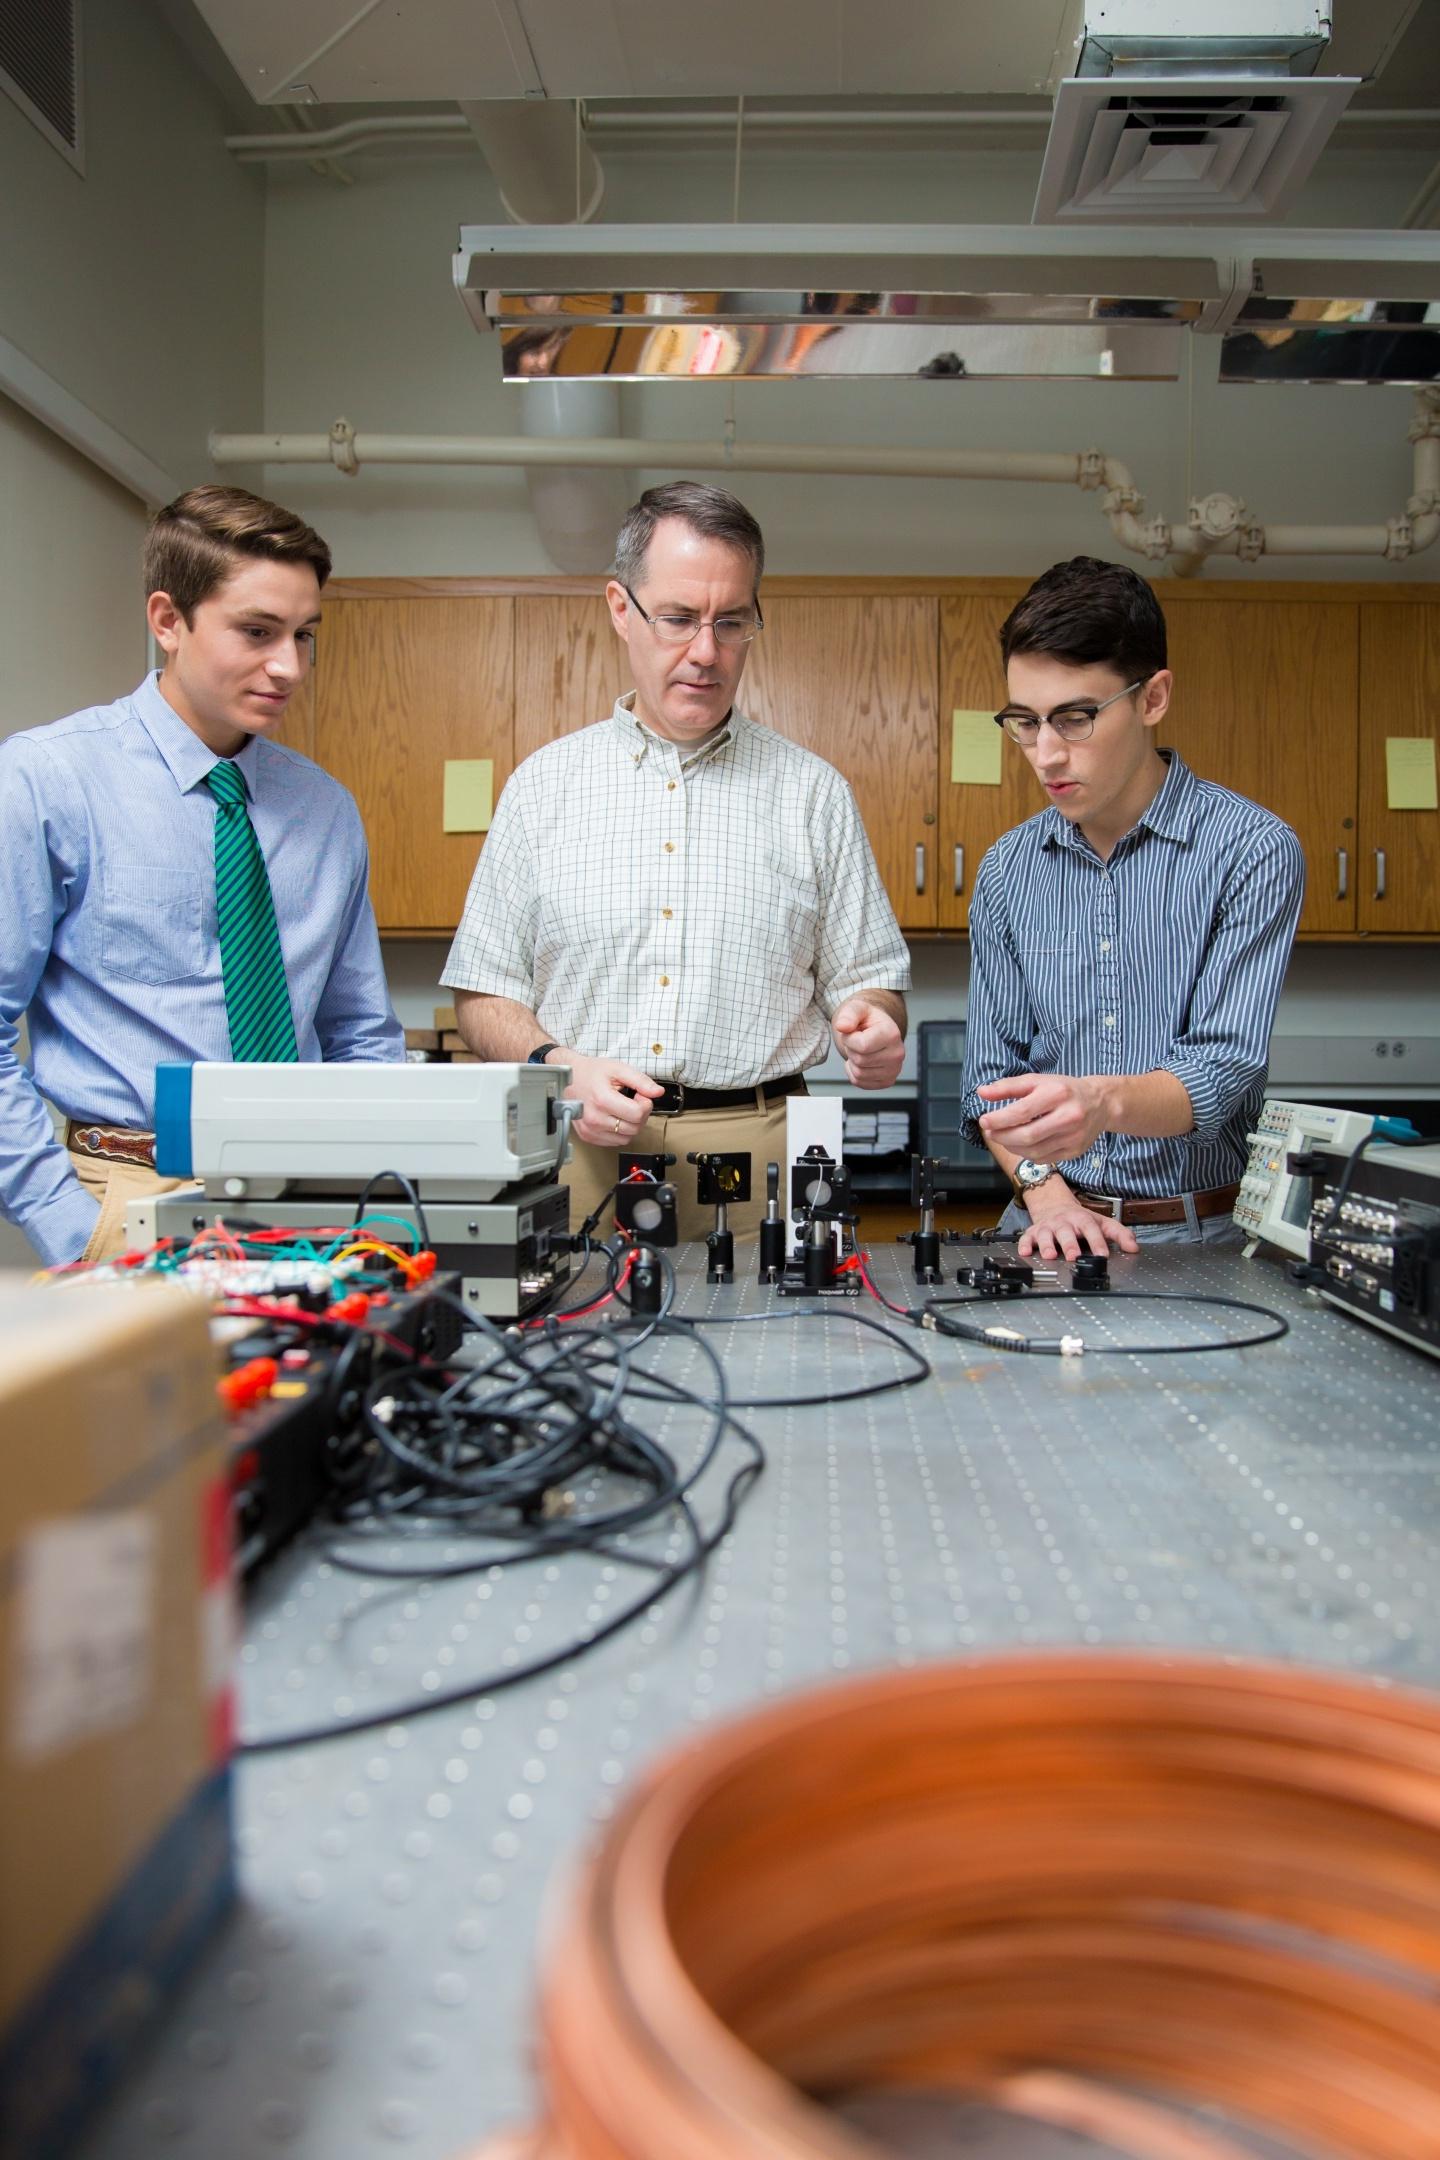 Professor and two male students using equipment